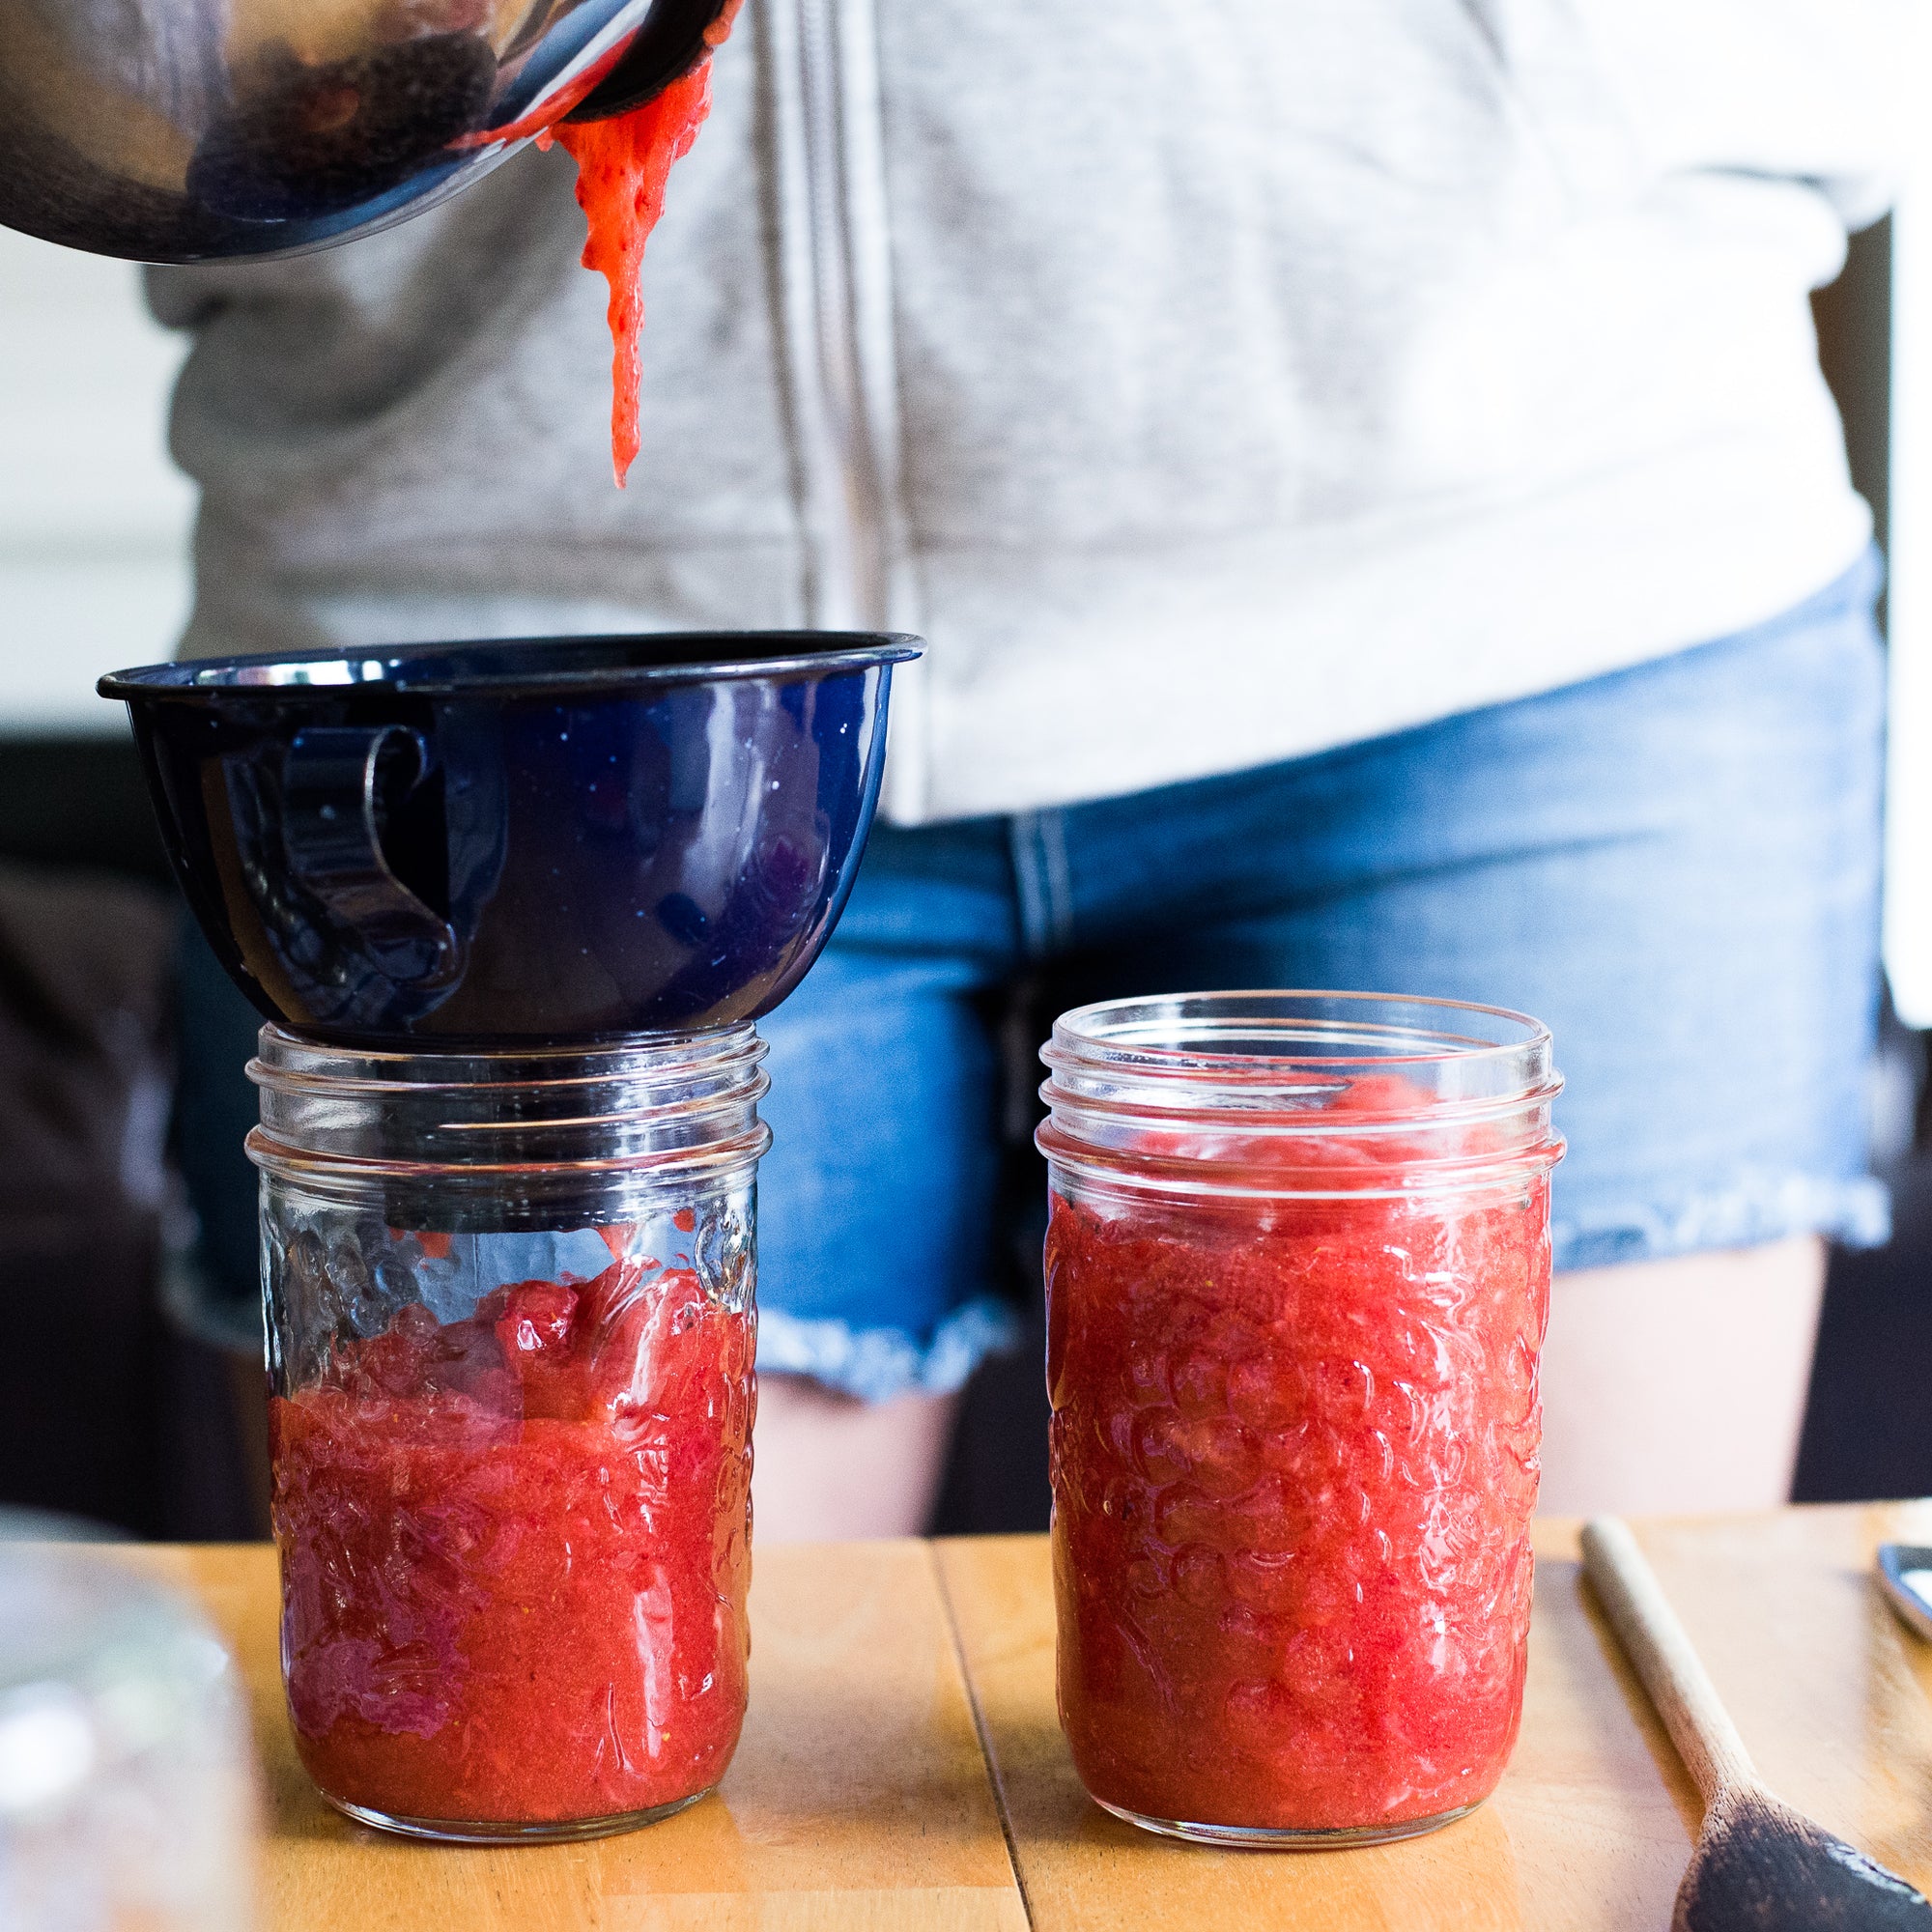 Can You Freeze Mason Jars? Tips for Freezing Your Food.